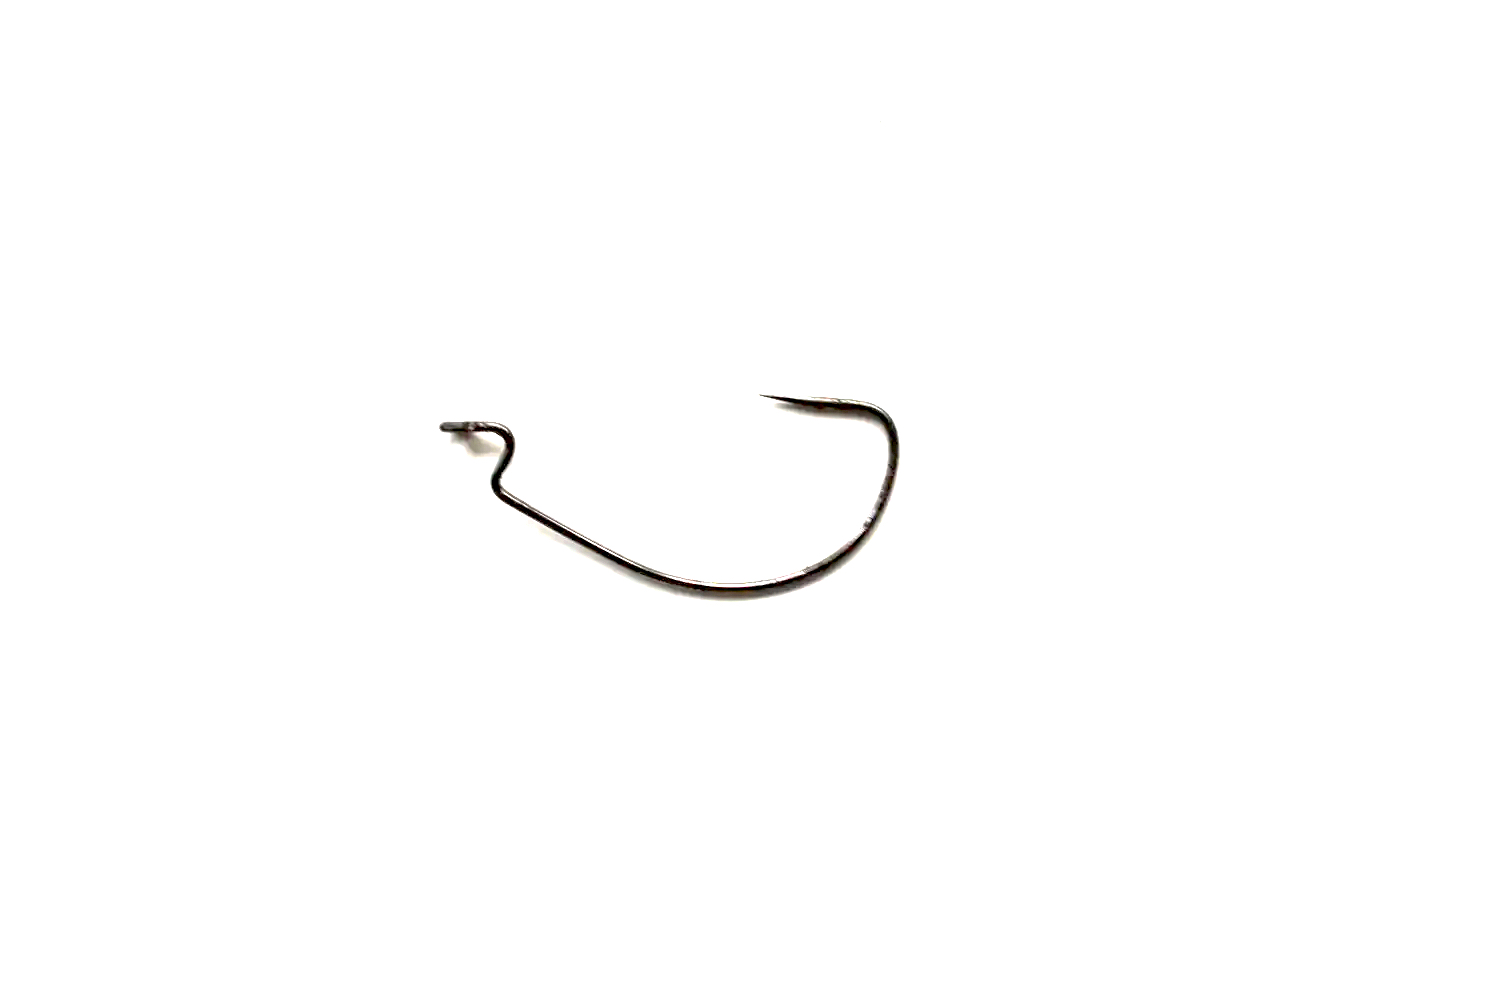 Worm or weedless hook